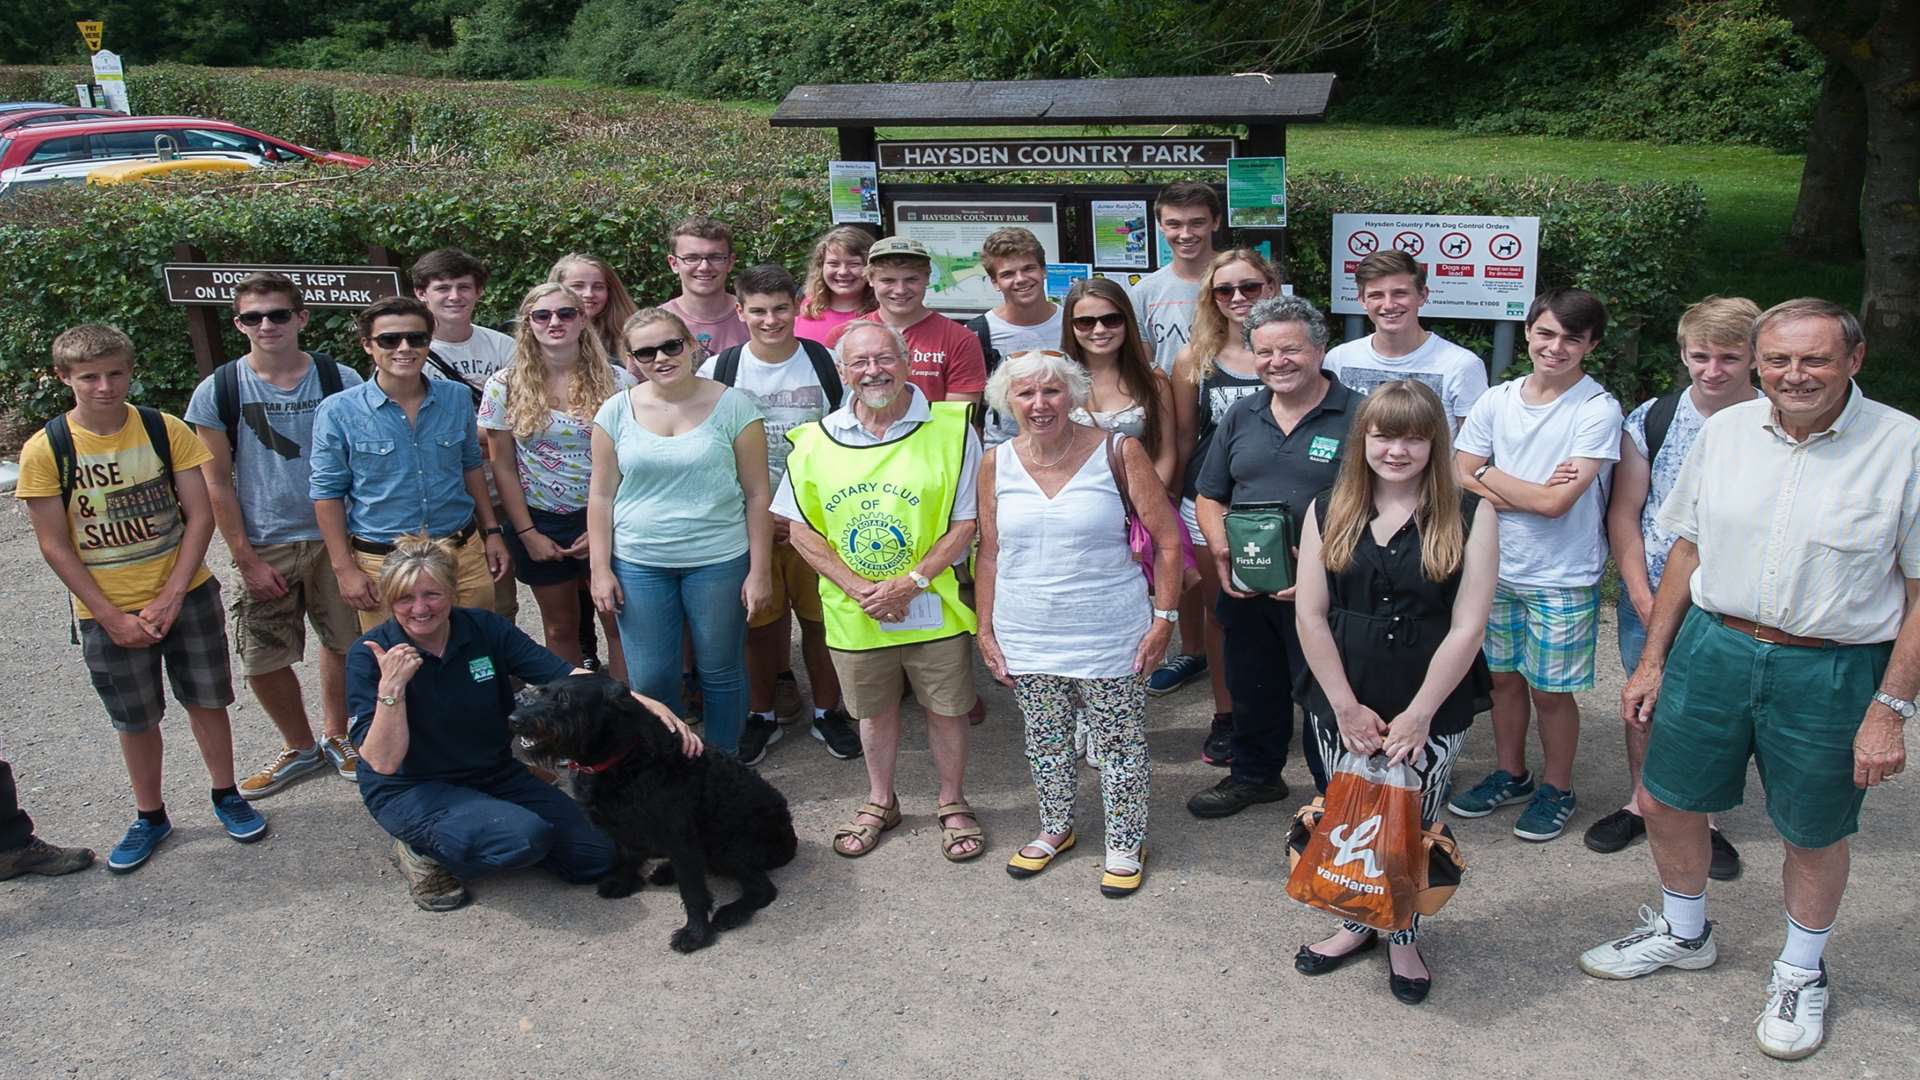 Members of the Rotary Club of Tonbridge along with staff from Tonbridge & Malling Borough Council with the exchange students as they get ready to start work at Haysden Country Park